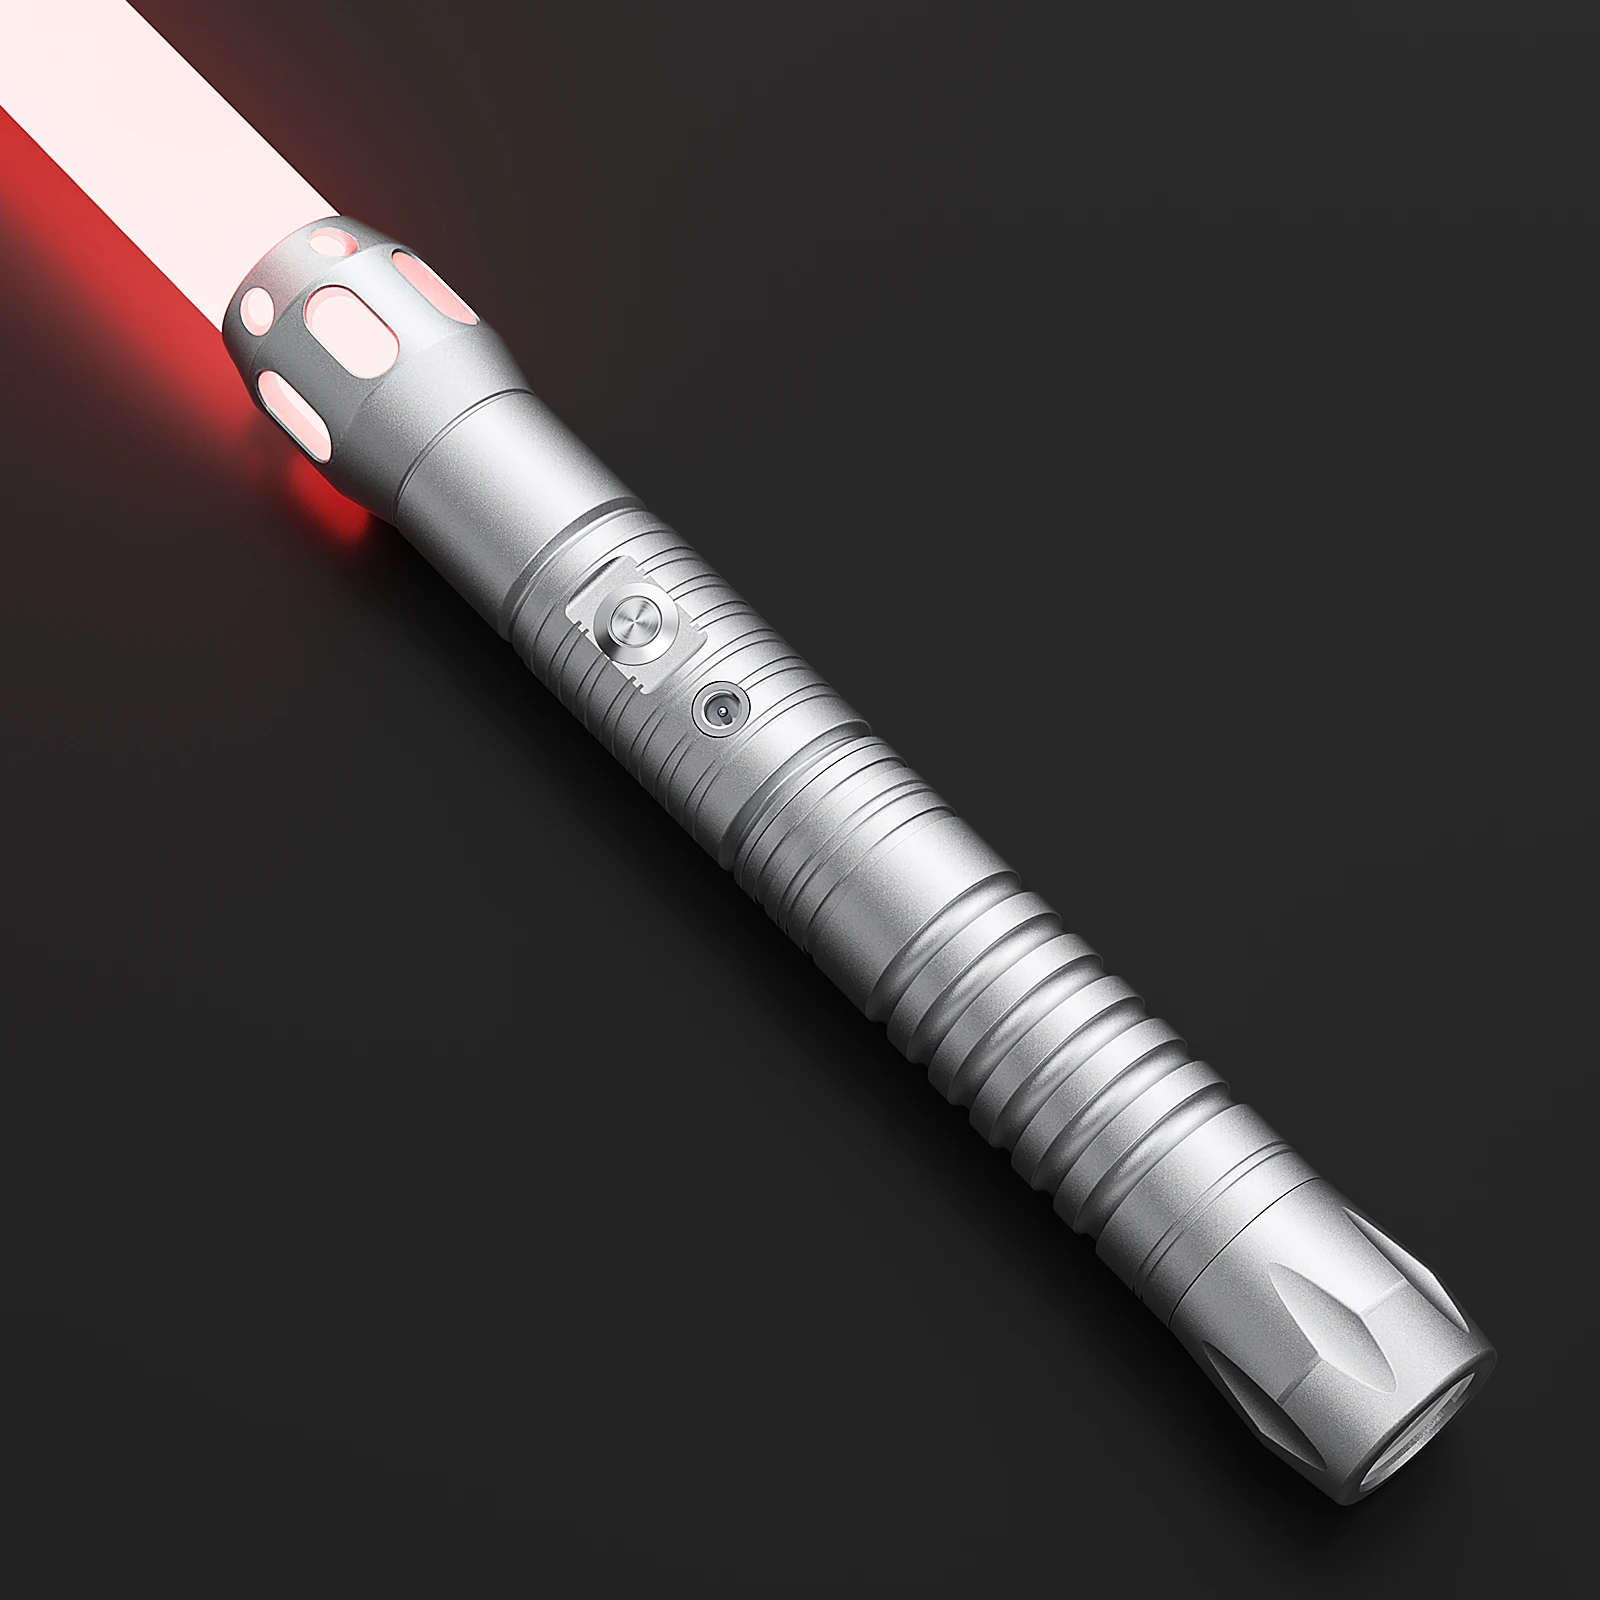 

WANARICO 15-Color RGB Lightsaber With 10 Sets Sound Effects Mode FX Duel Laser Sword Aluminum Handle With Tone Color USB Charge